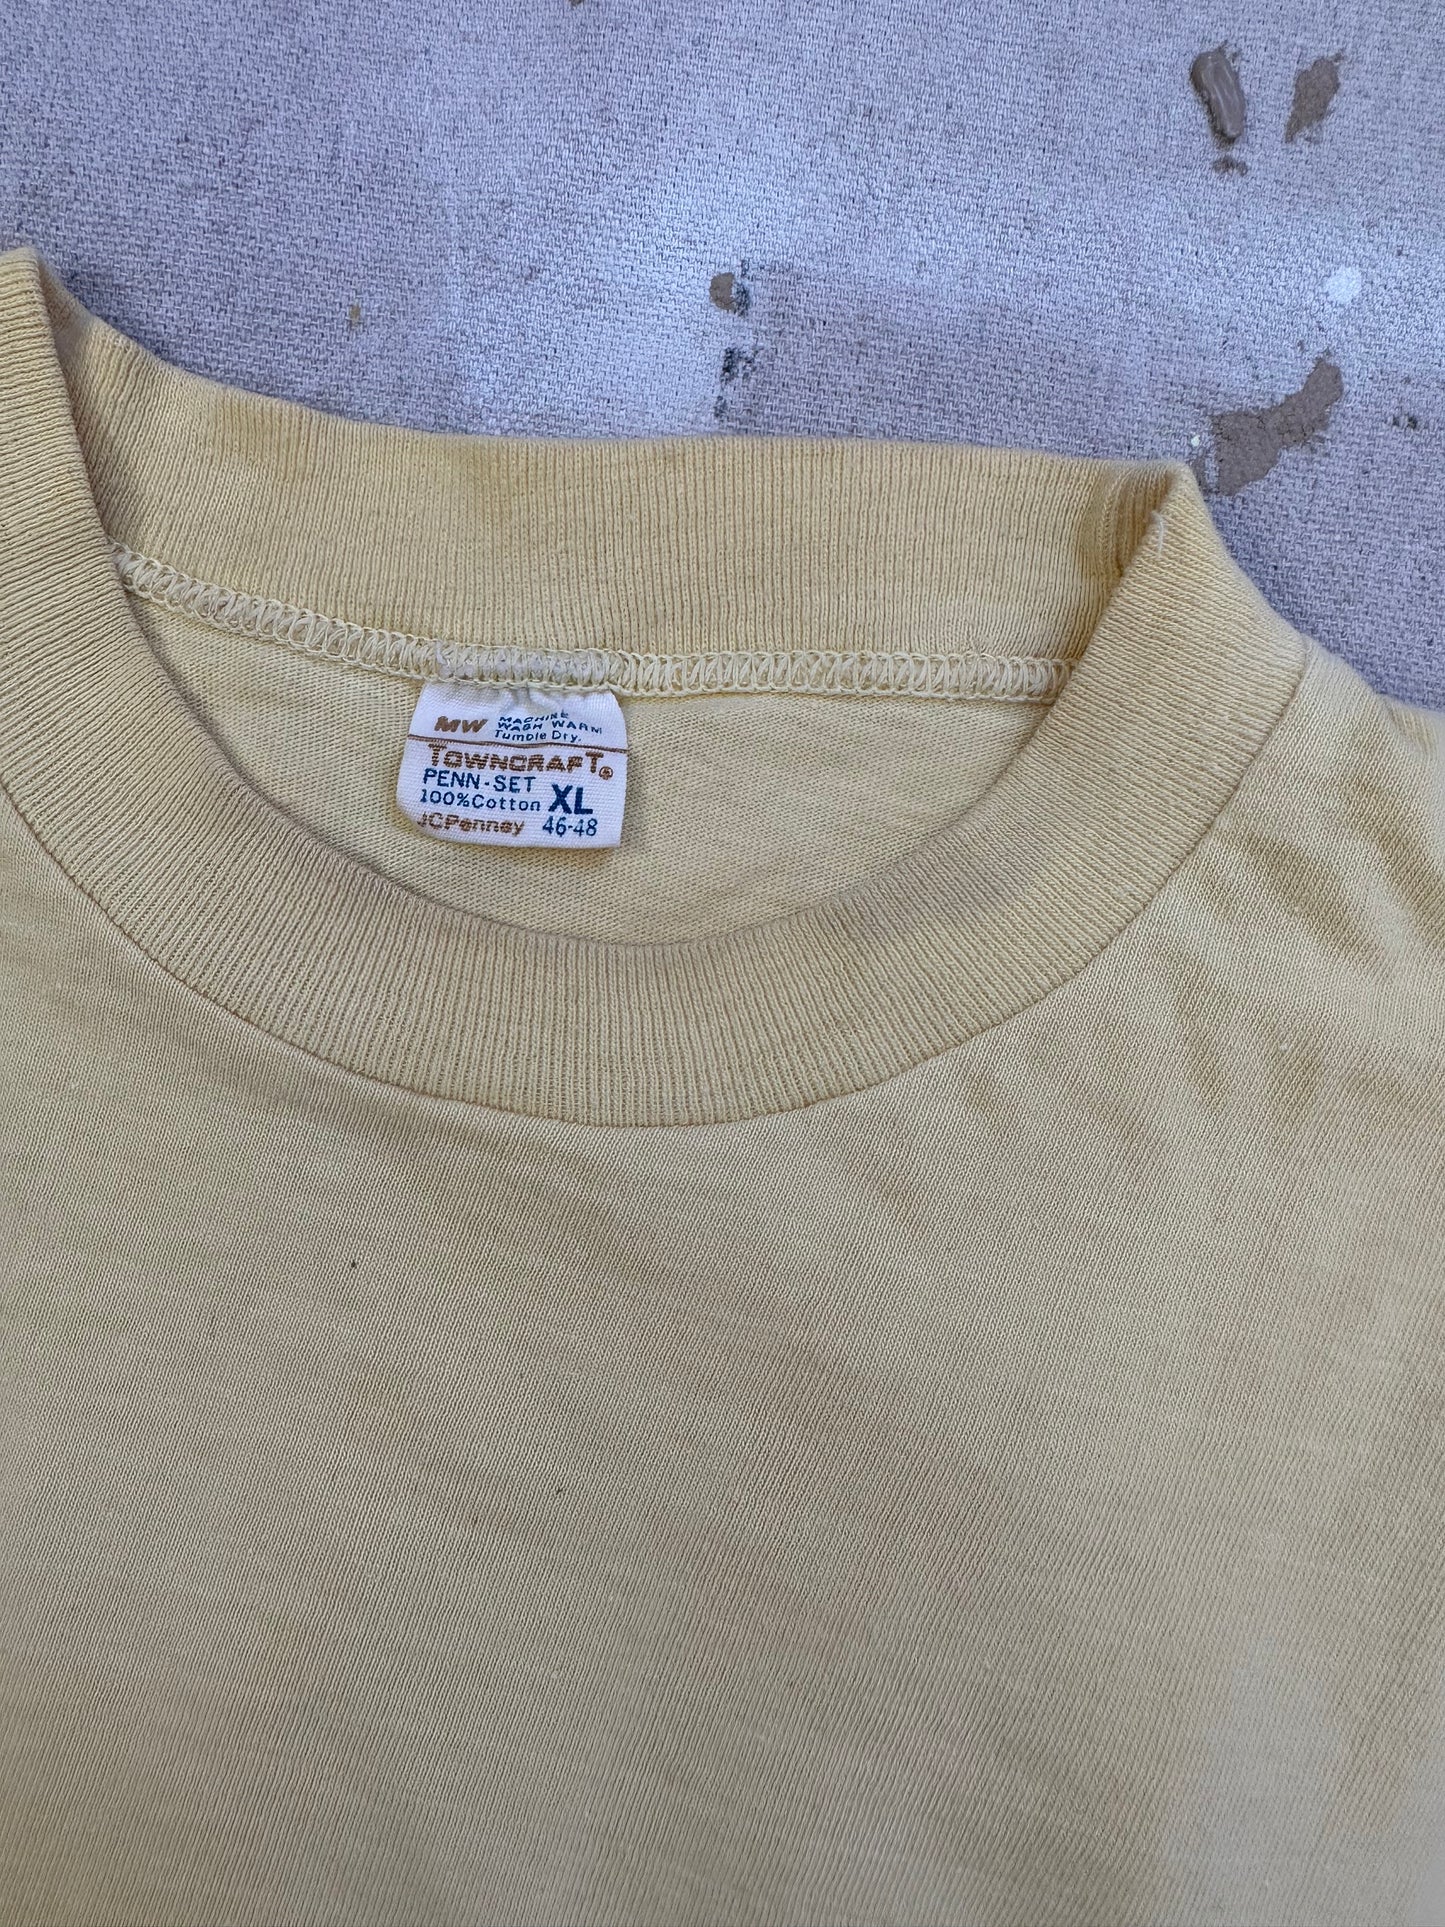 70s JCPenney Towncraft Pocket Tee